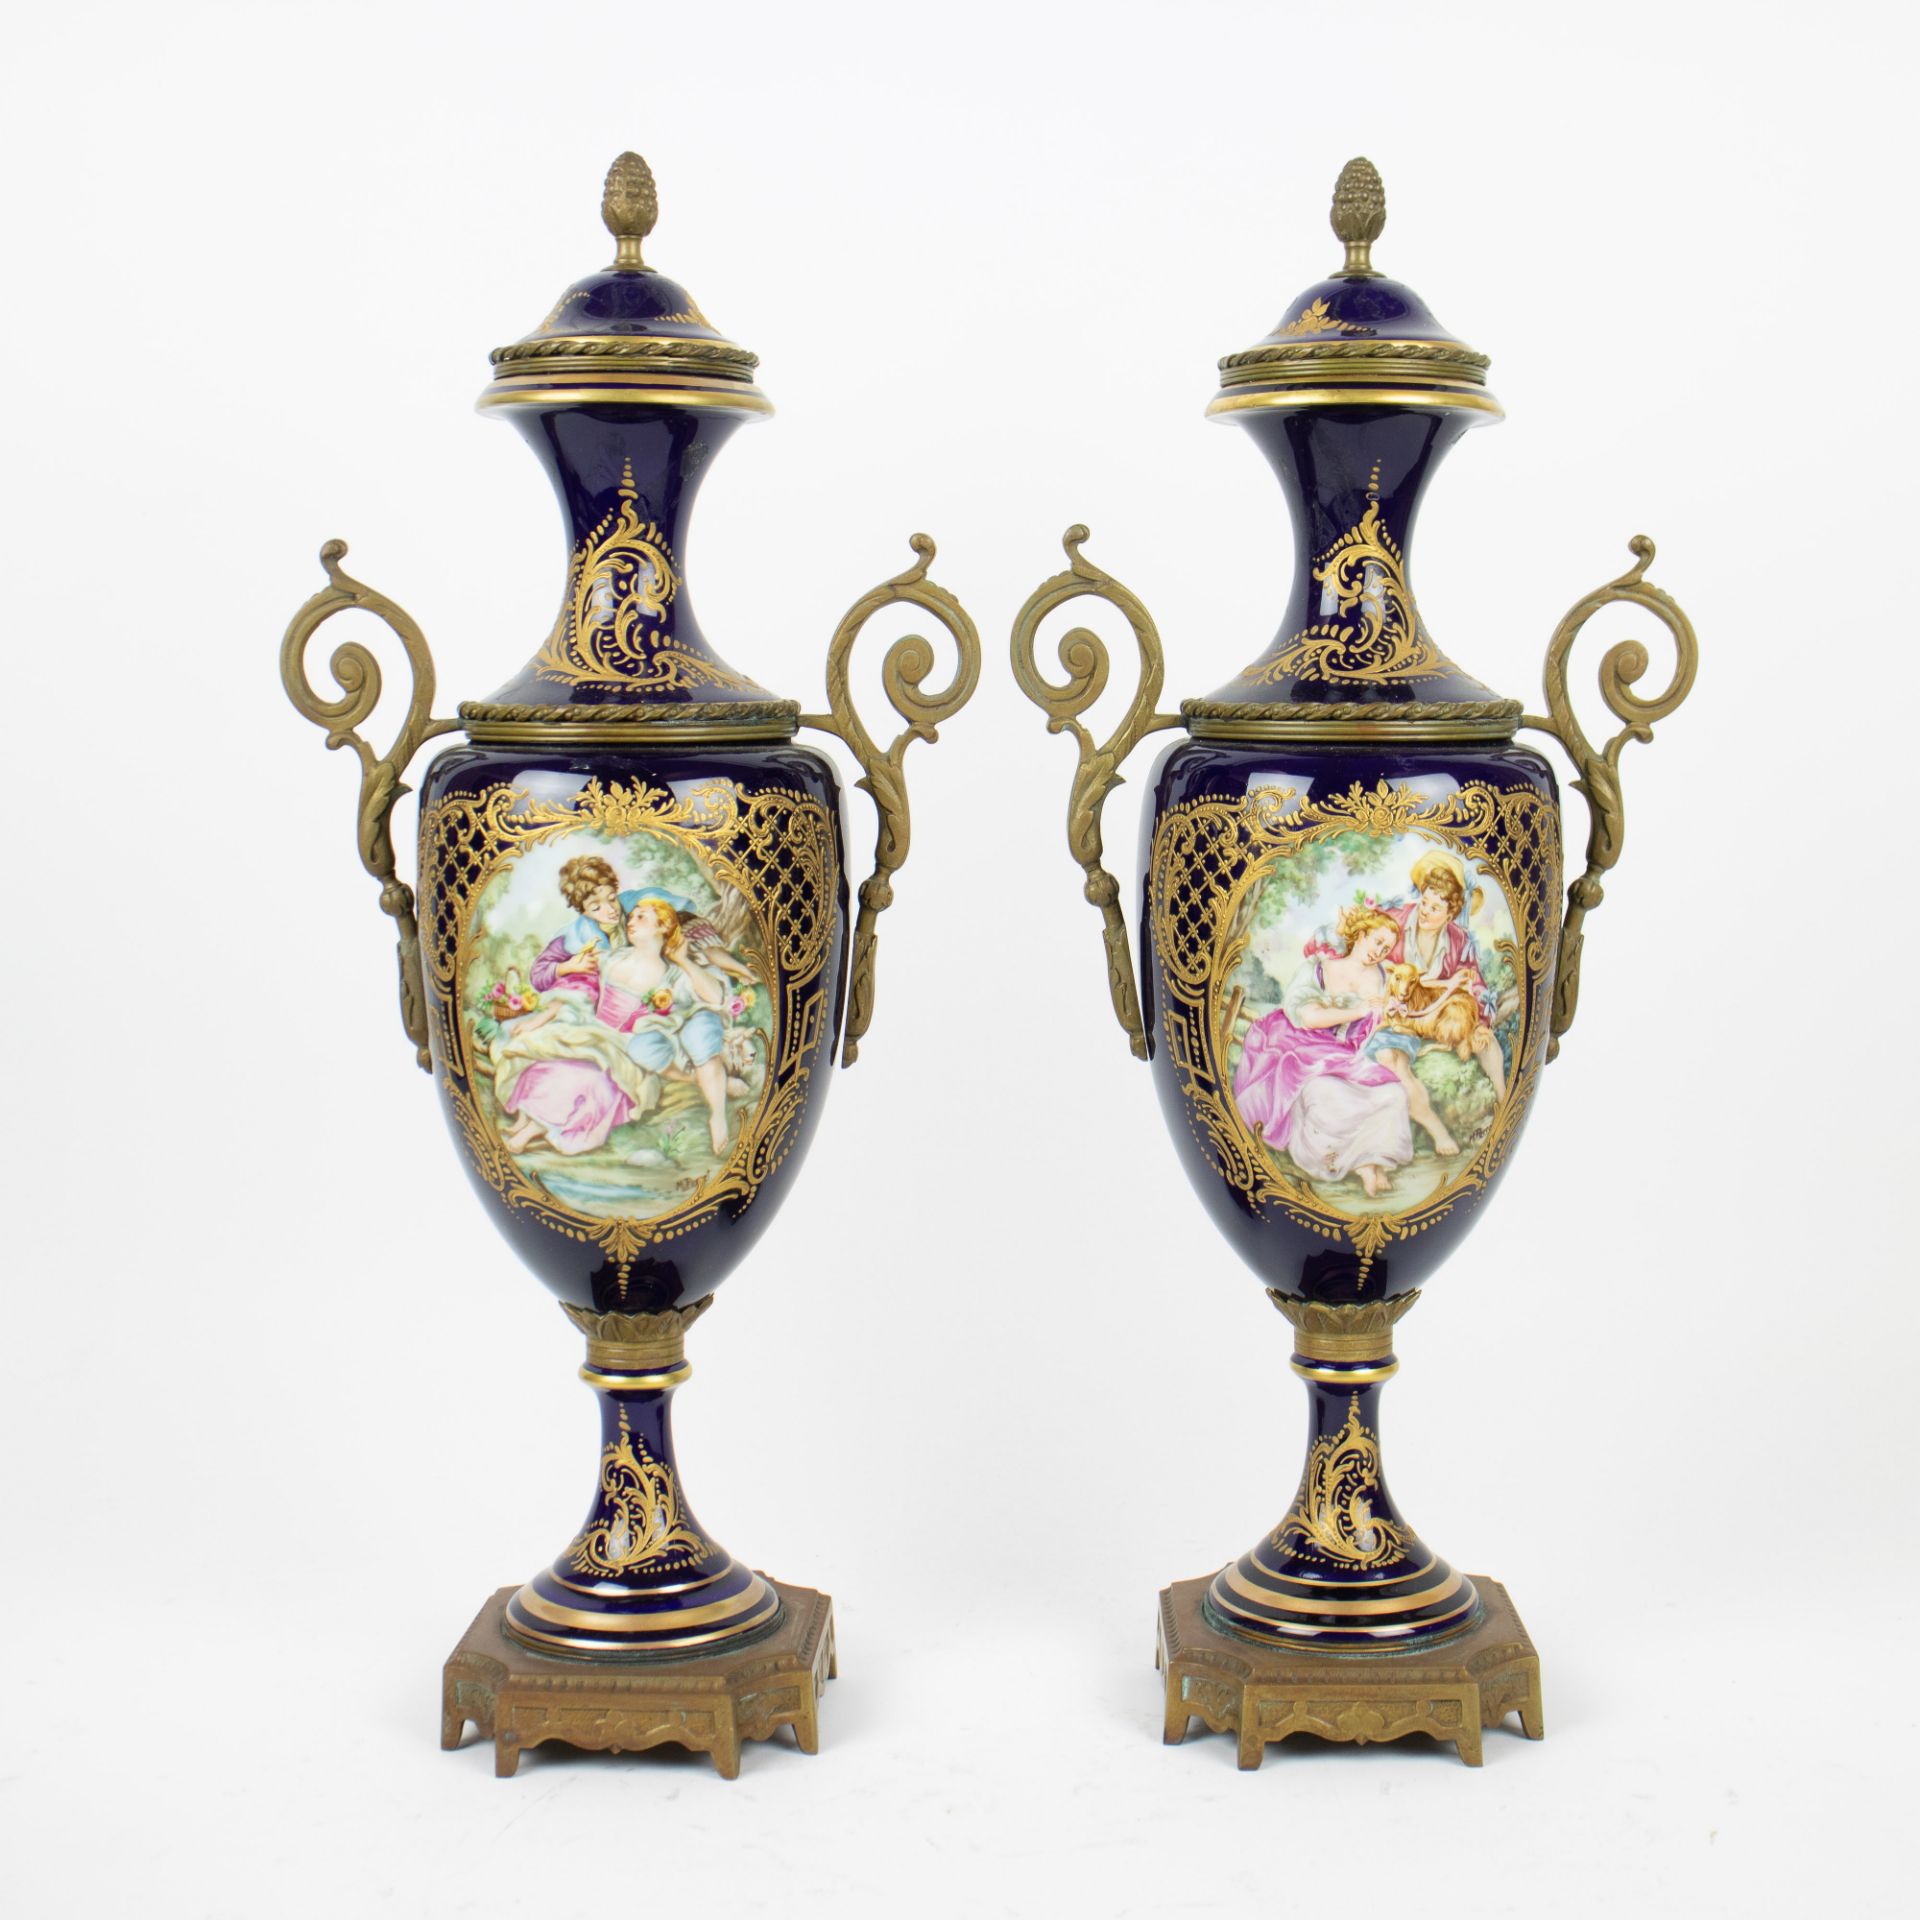 Sèvres handpainted garniture centre piece and a pair of covered vases - Image 7 of 16